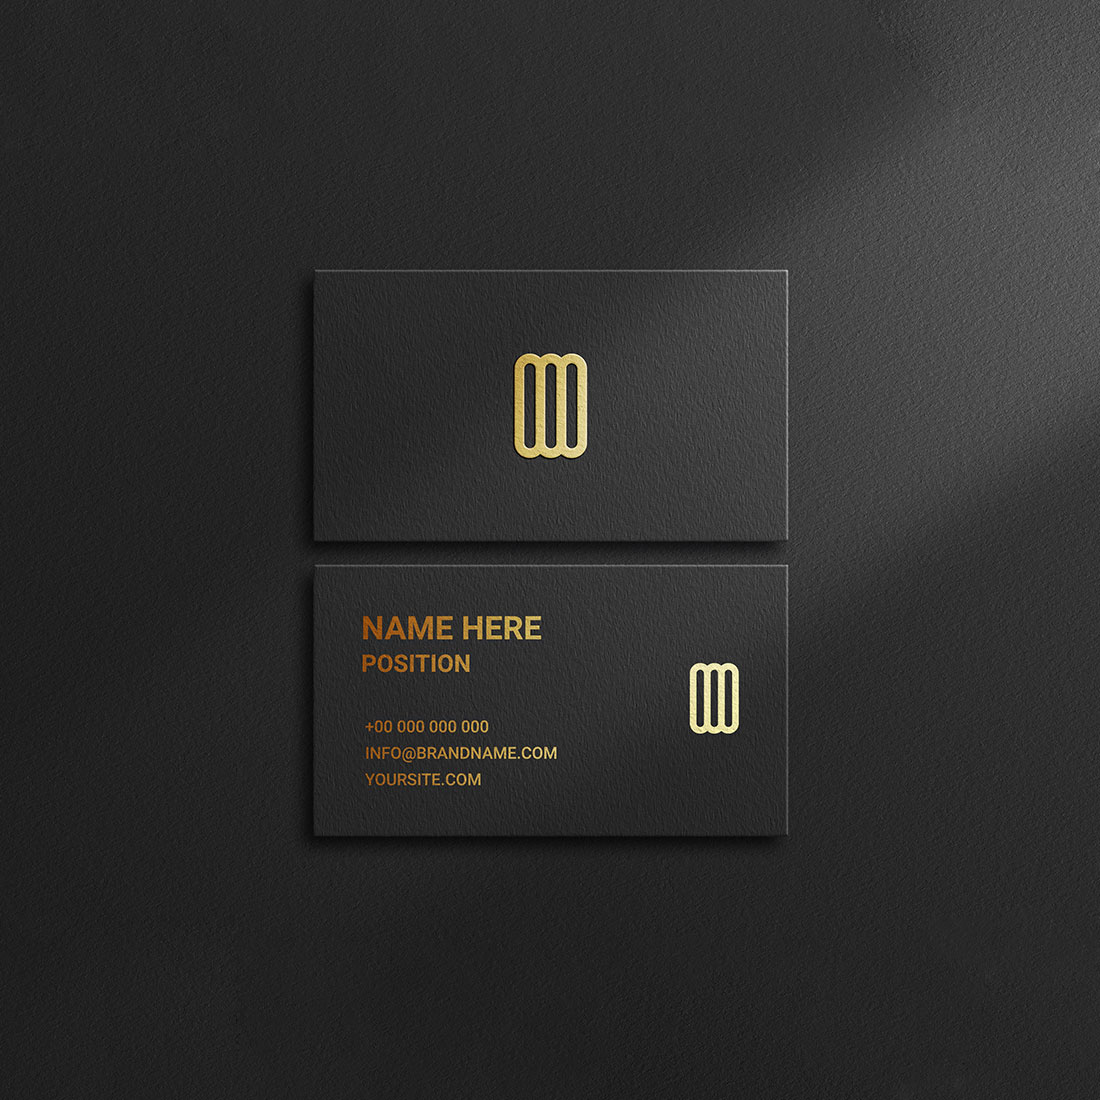 Free Luxury Business Card Mockup Template cover image.